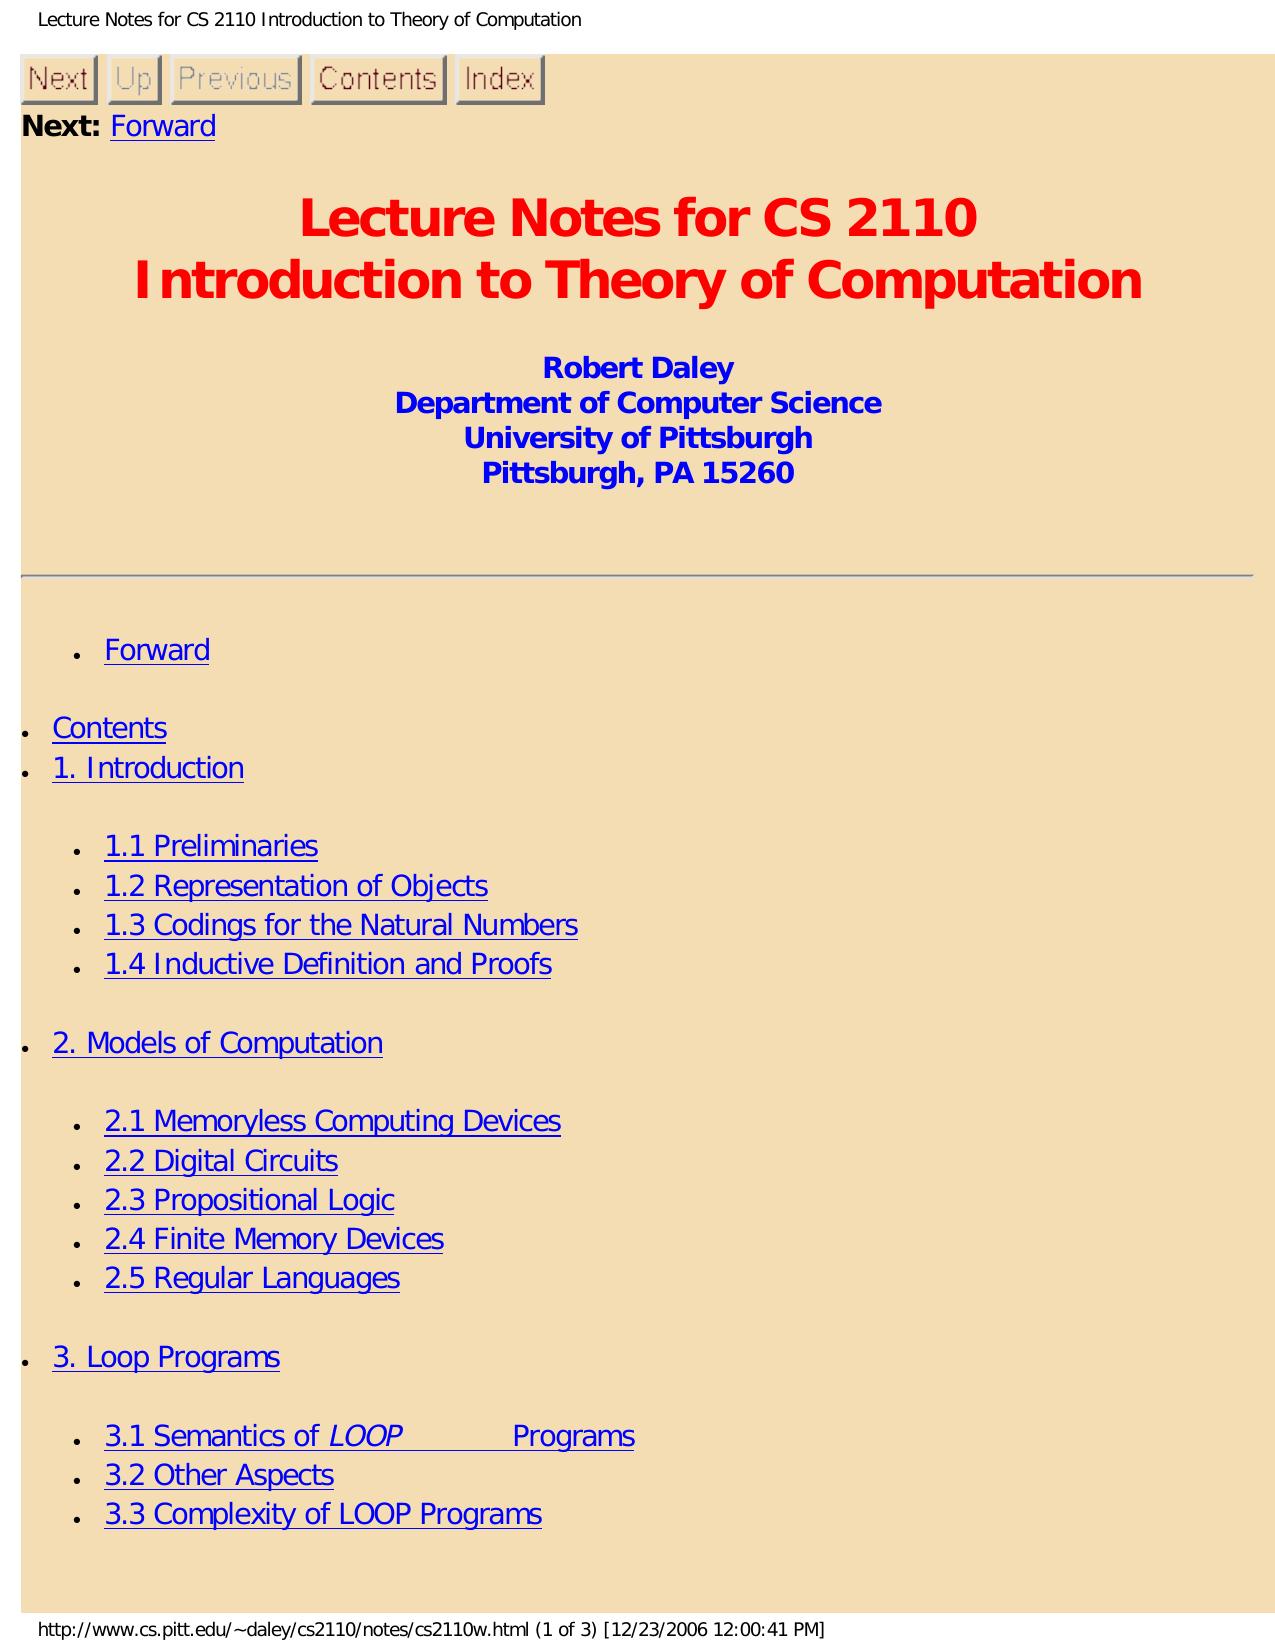 Lecture Notes for CS 2110 Introduction to Theory of Computation